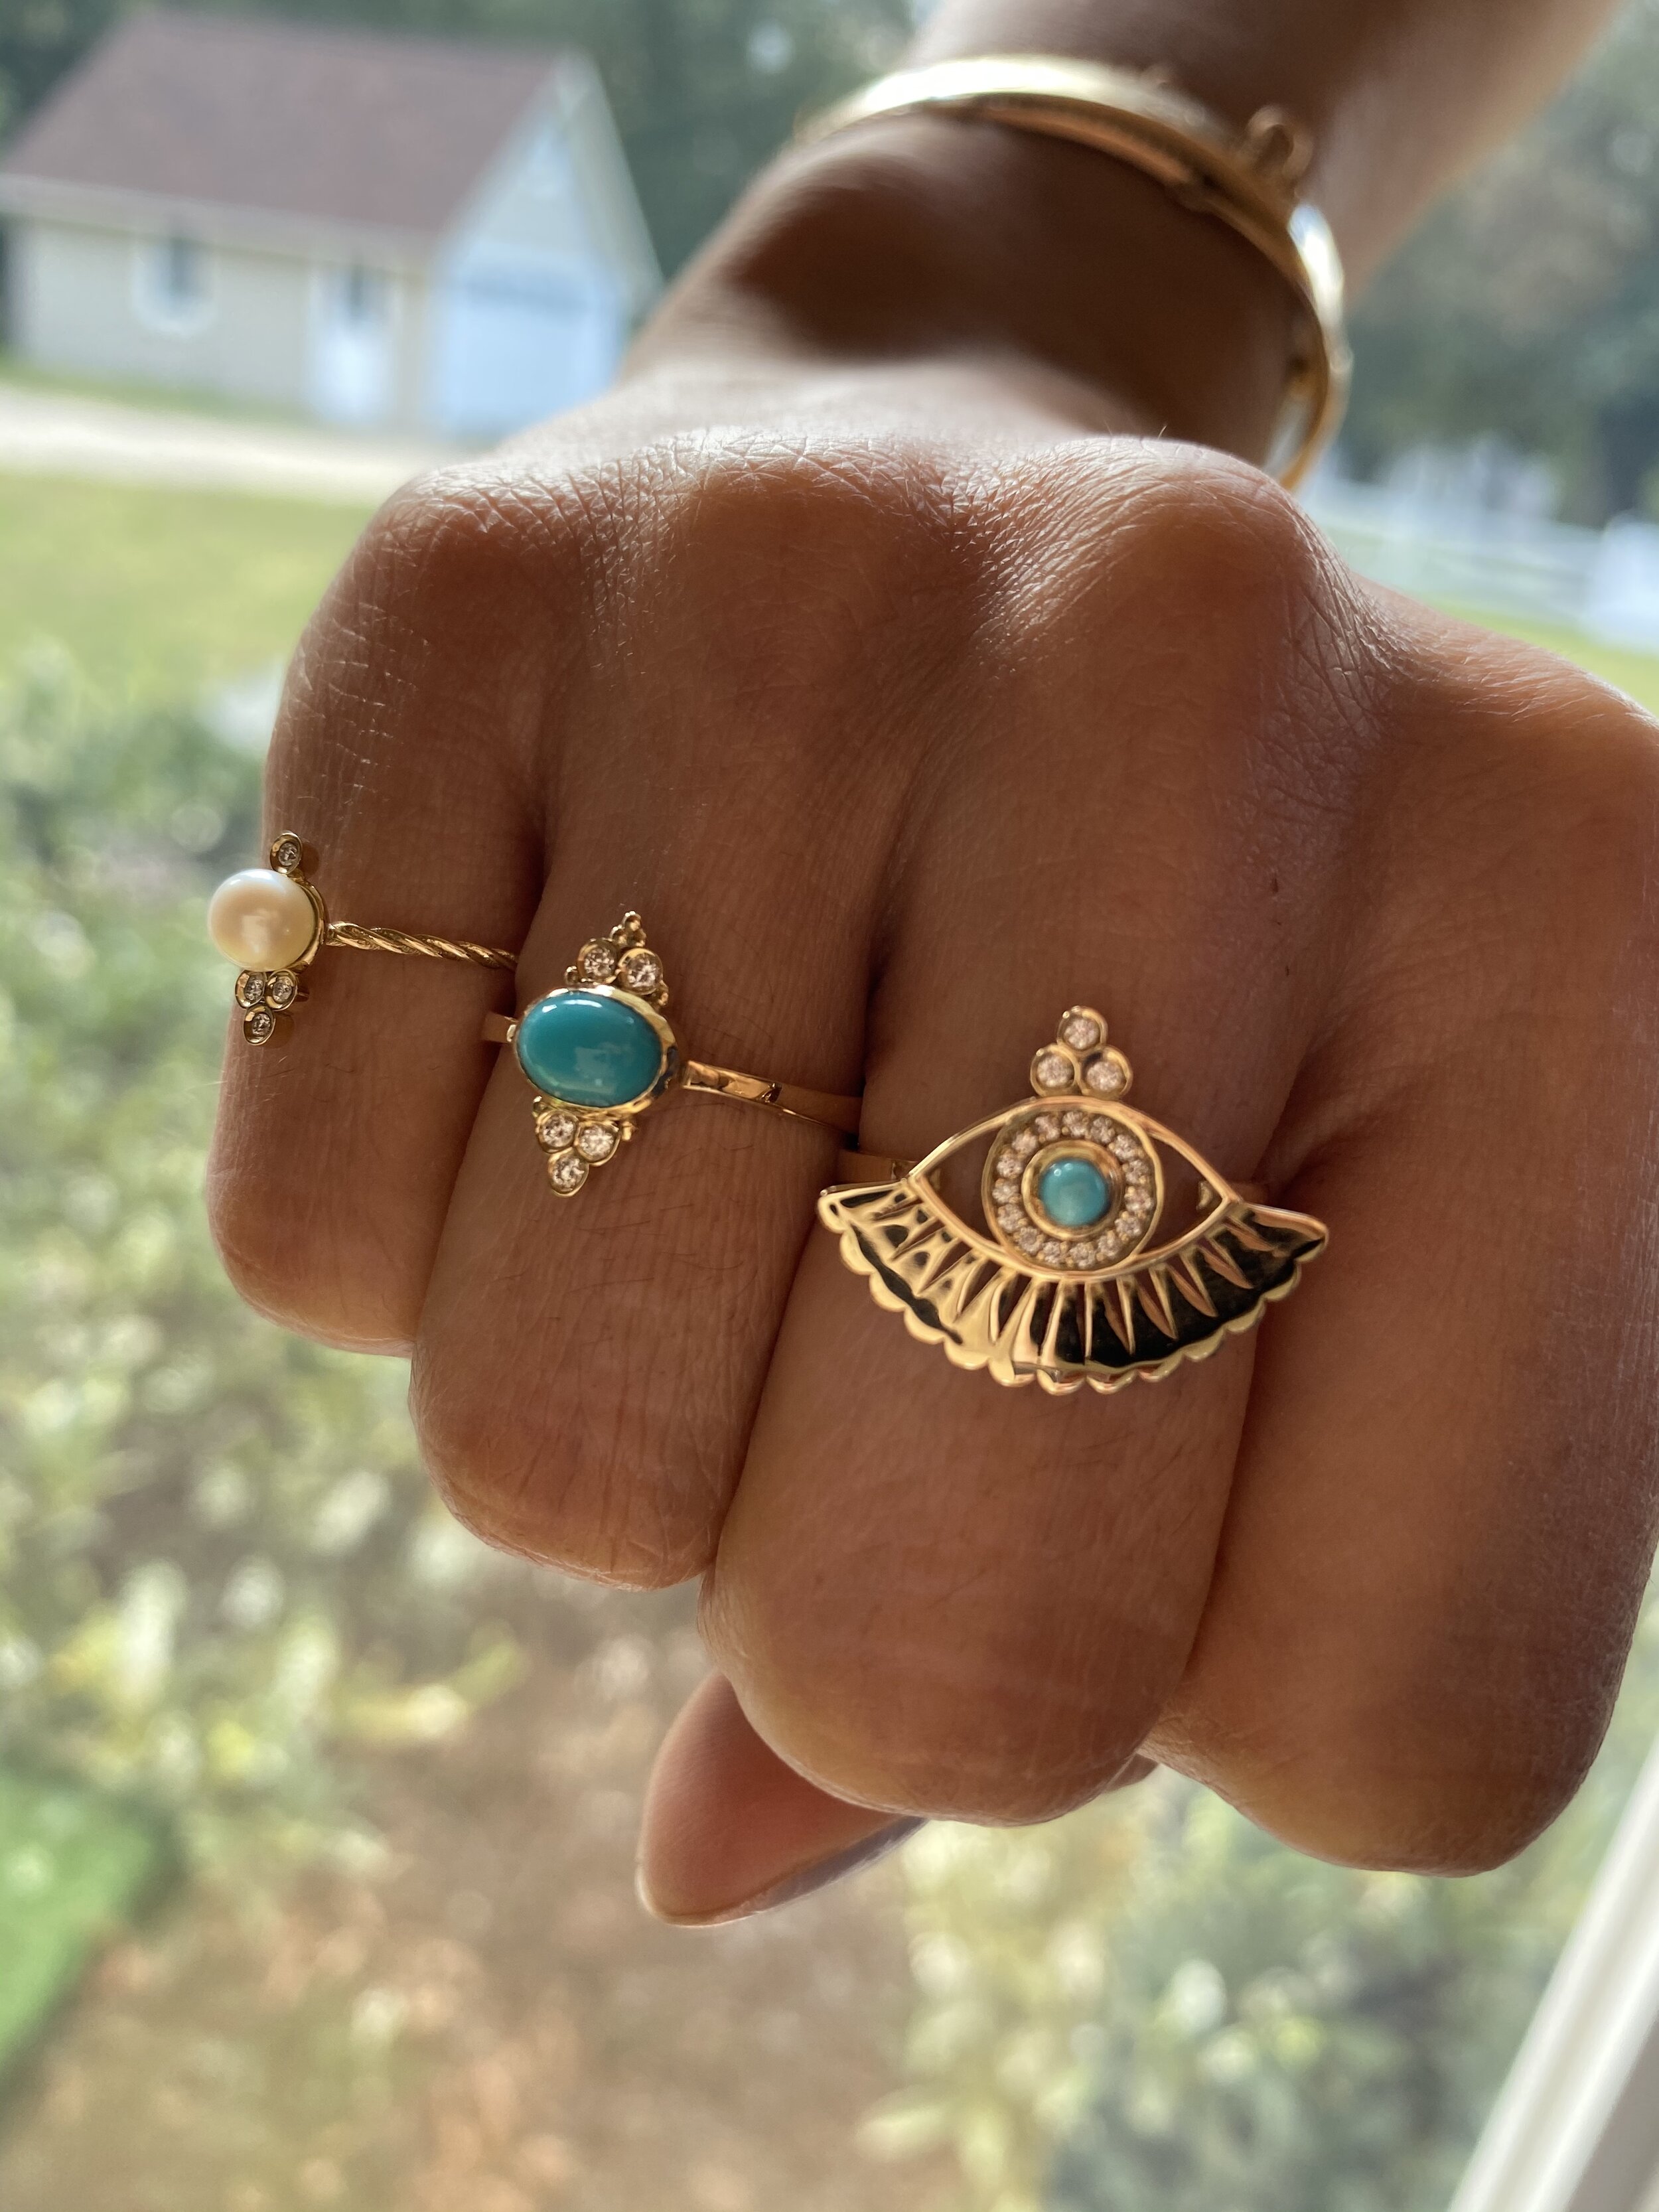 OWN Your Story 14K Yellow Gold, Diamond & Turquoise Evil Eye Lower Lashes Ring, $995To view OWN Your Story’s Turquoise cabochon ring for $695, click hereTo view OWN Your Story’s Pearl Ring for $350, click here